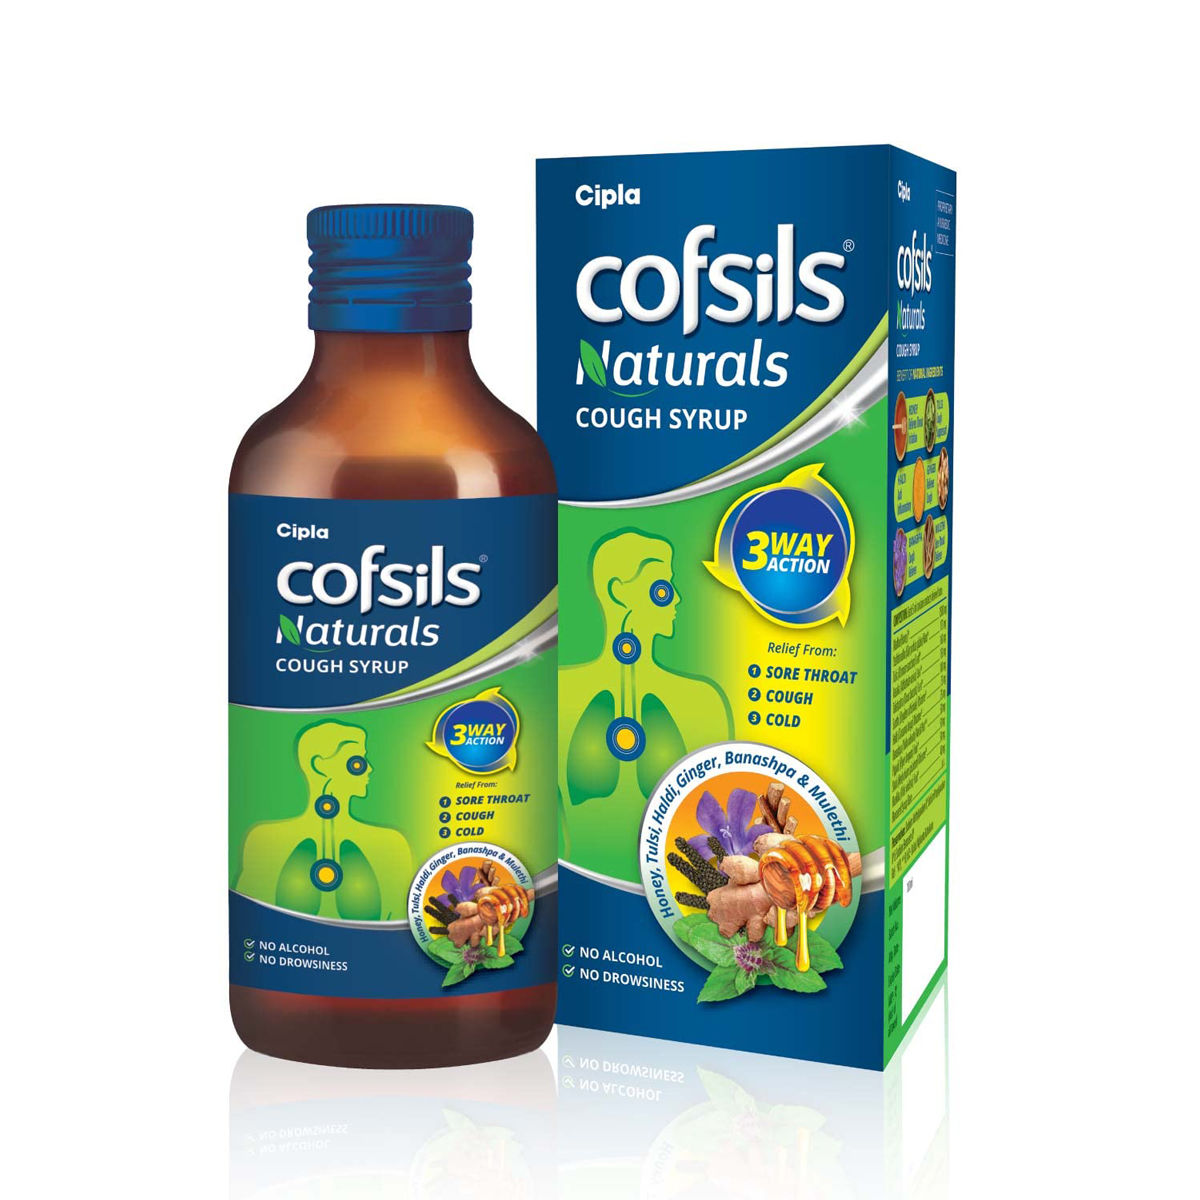 Cofsils Naturals Cough Syrup, 100 ml, Pack of 1 